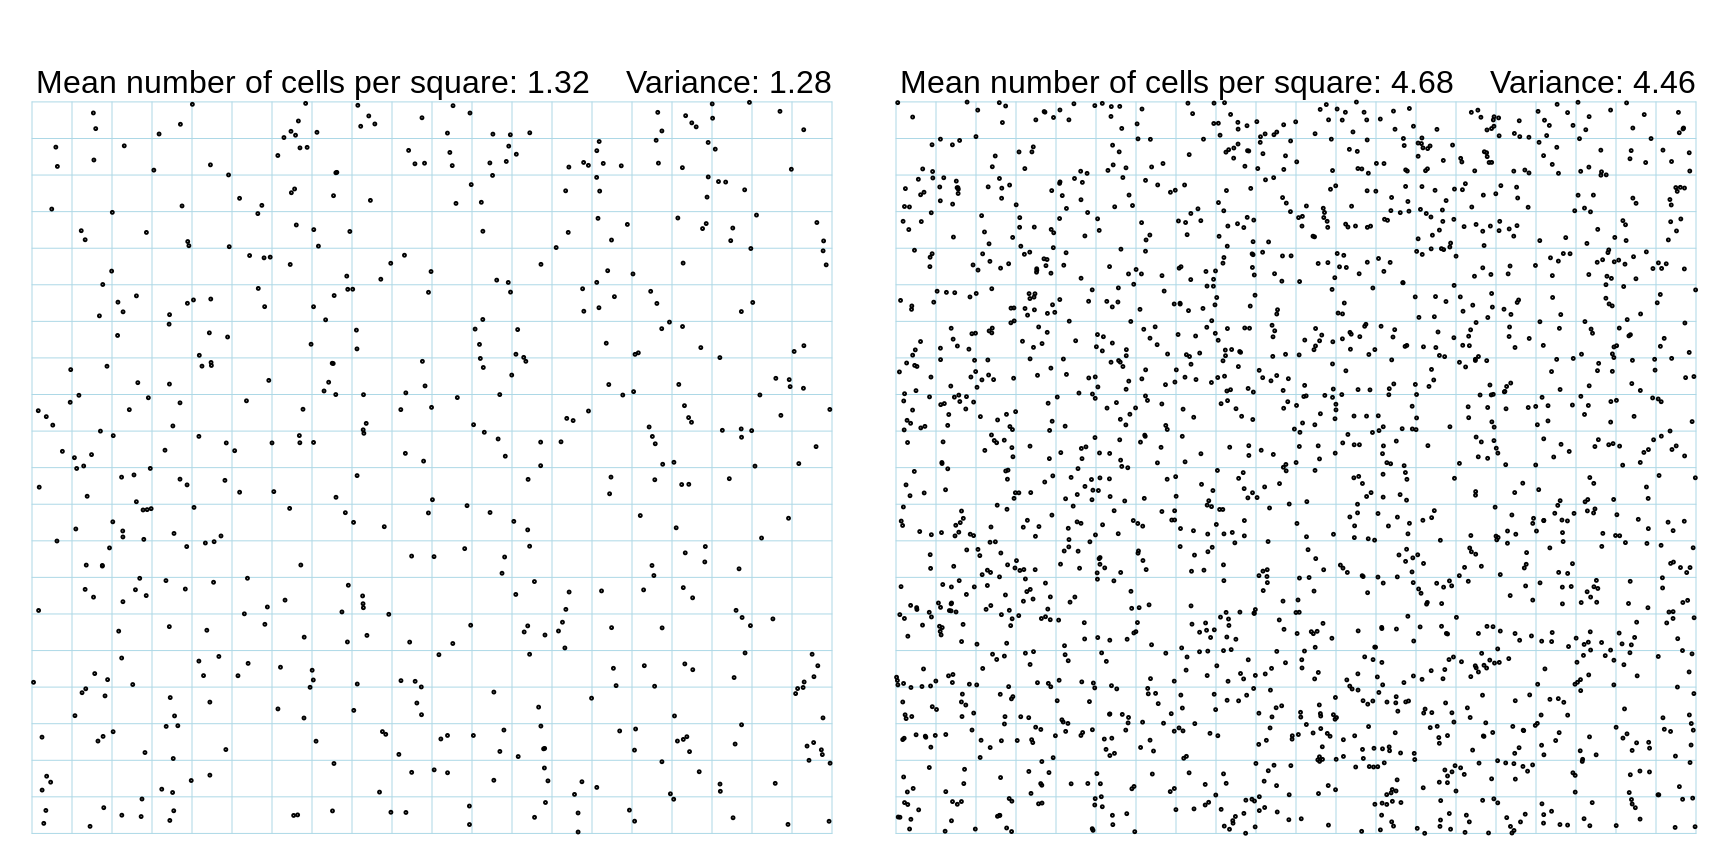 Examples of distributions of Yeast Cells over 1 sq. mm. divided into 400 squares. The data in the right panel are based on the 400 counts in Table 1 of Student's article (concentration IV), while those in the left panel are simulated to match the reported mean (1.32 per square) and variance (1.28) for the 400 counts at concentration II. It appears that Student calculated the variance using a divisor of n rather than n-1.